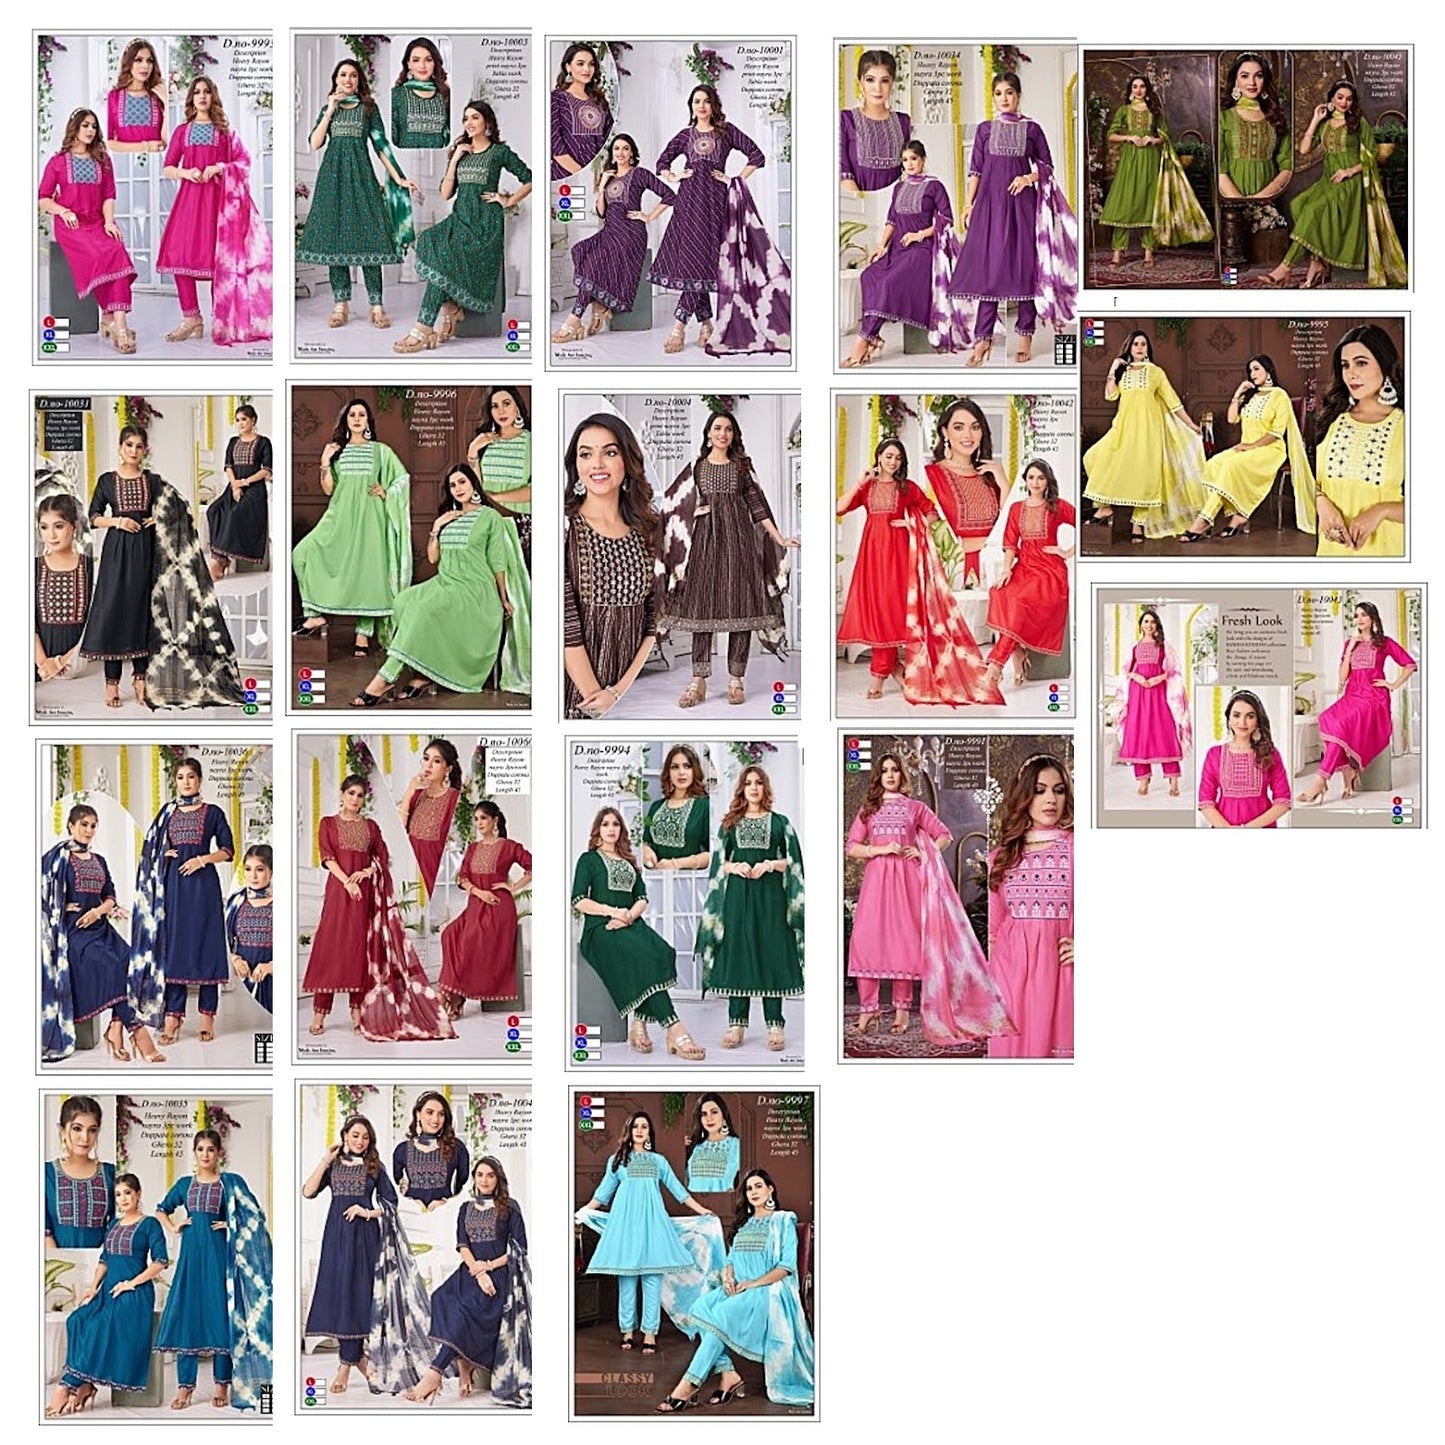 Nayra Cut 1707 Globe Heavy Rayon Readymade Pant Style Suits Exporter